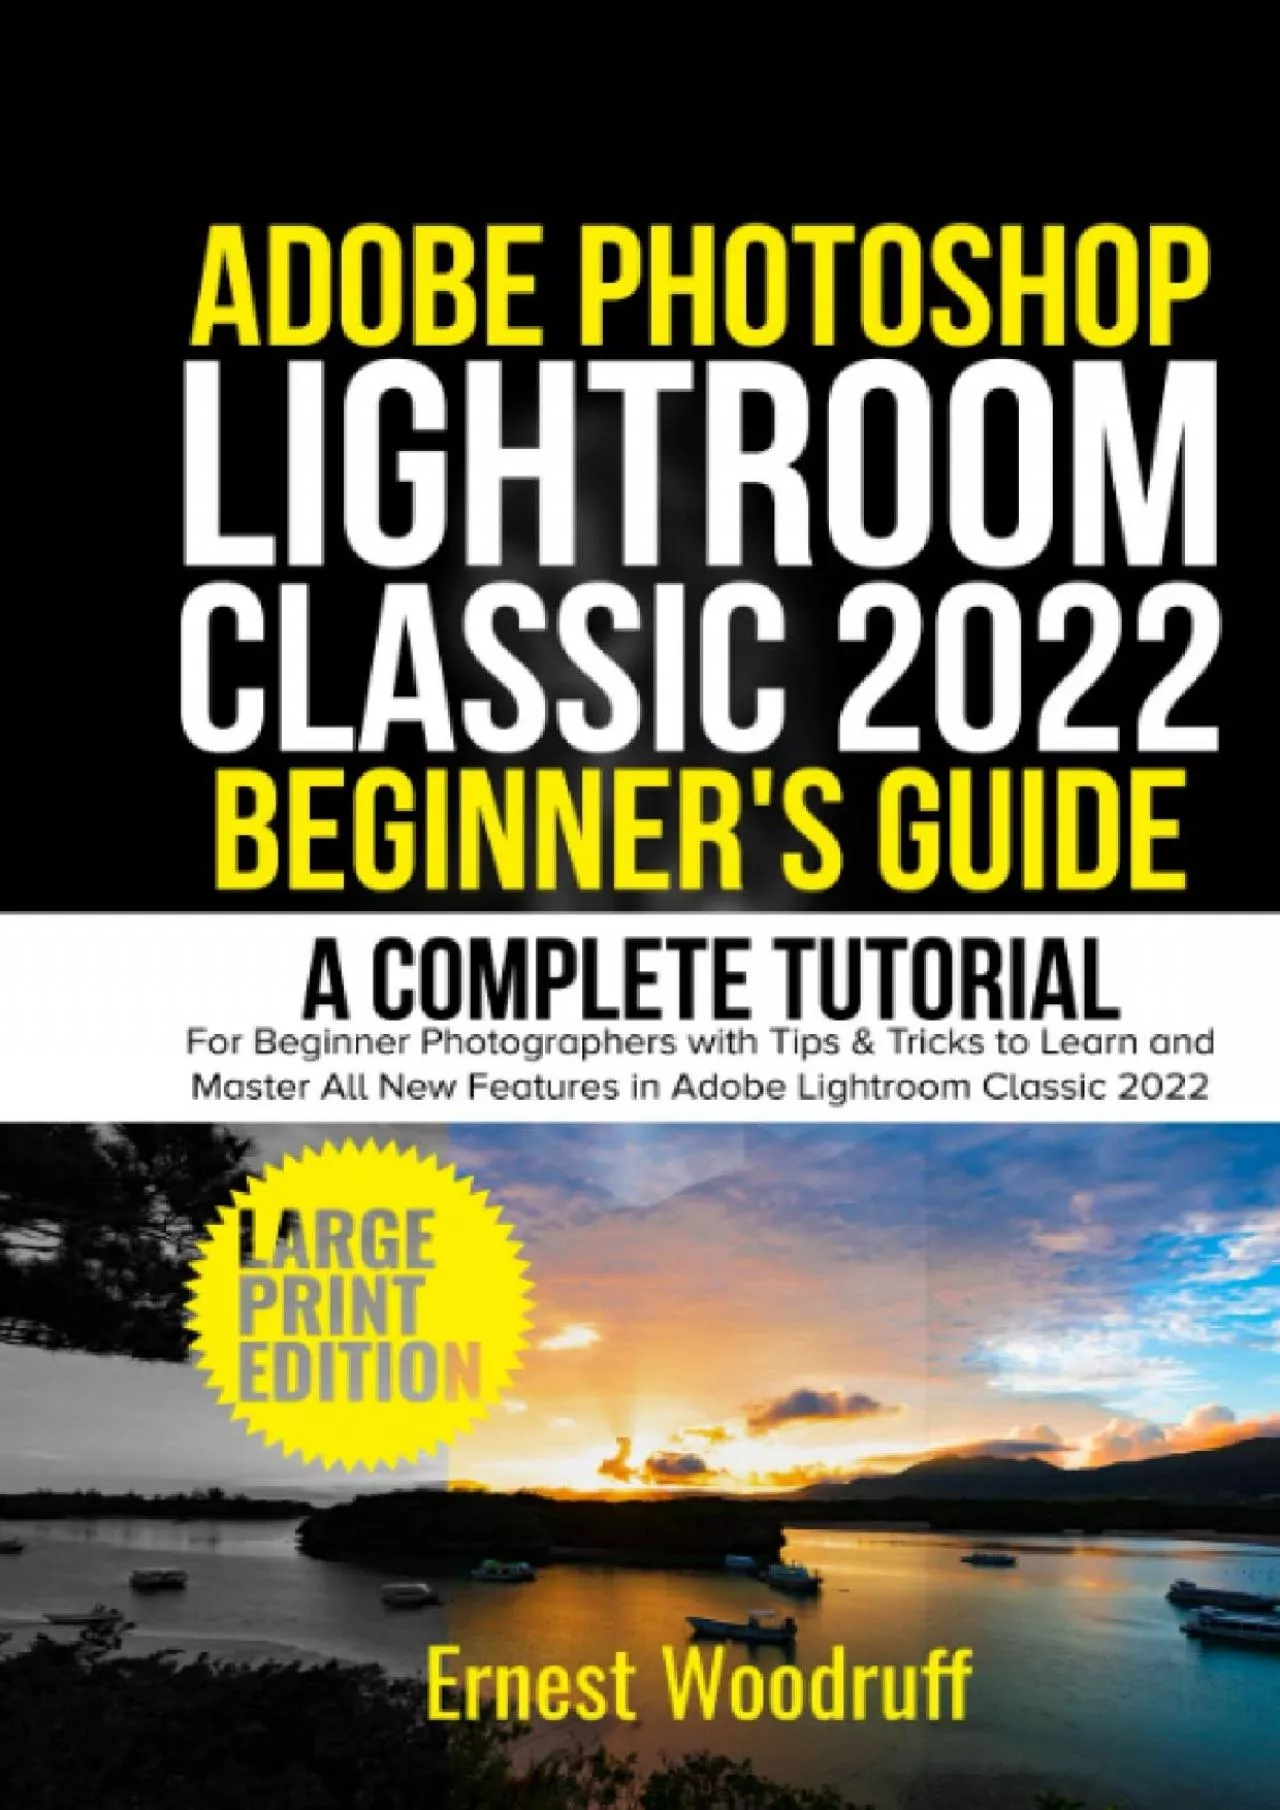 (DOWNLOAD)-Adobe Photoshop Lightroom Classic 2022 Beginner\'s Guide: A Complete Tutorial